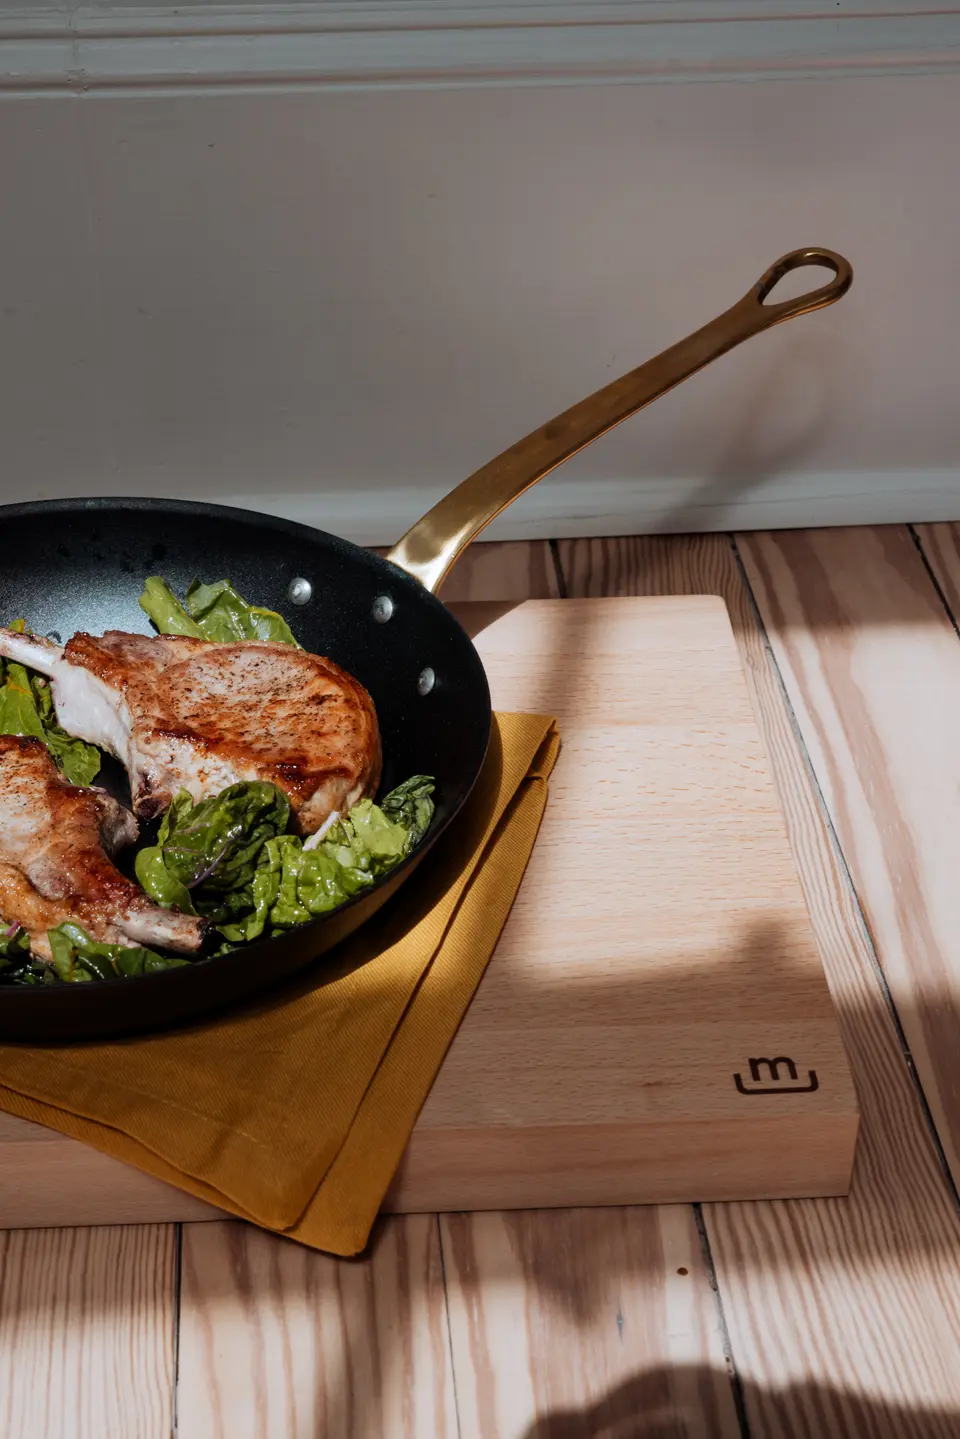 A skillet with seared chicken on a bed of greens is placed on a wooden cutting board on a countertop, bathed in sunlight.